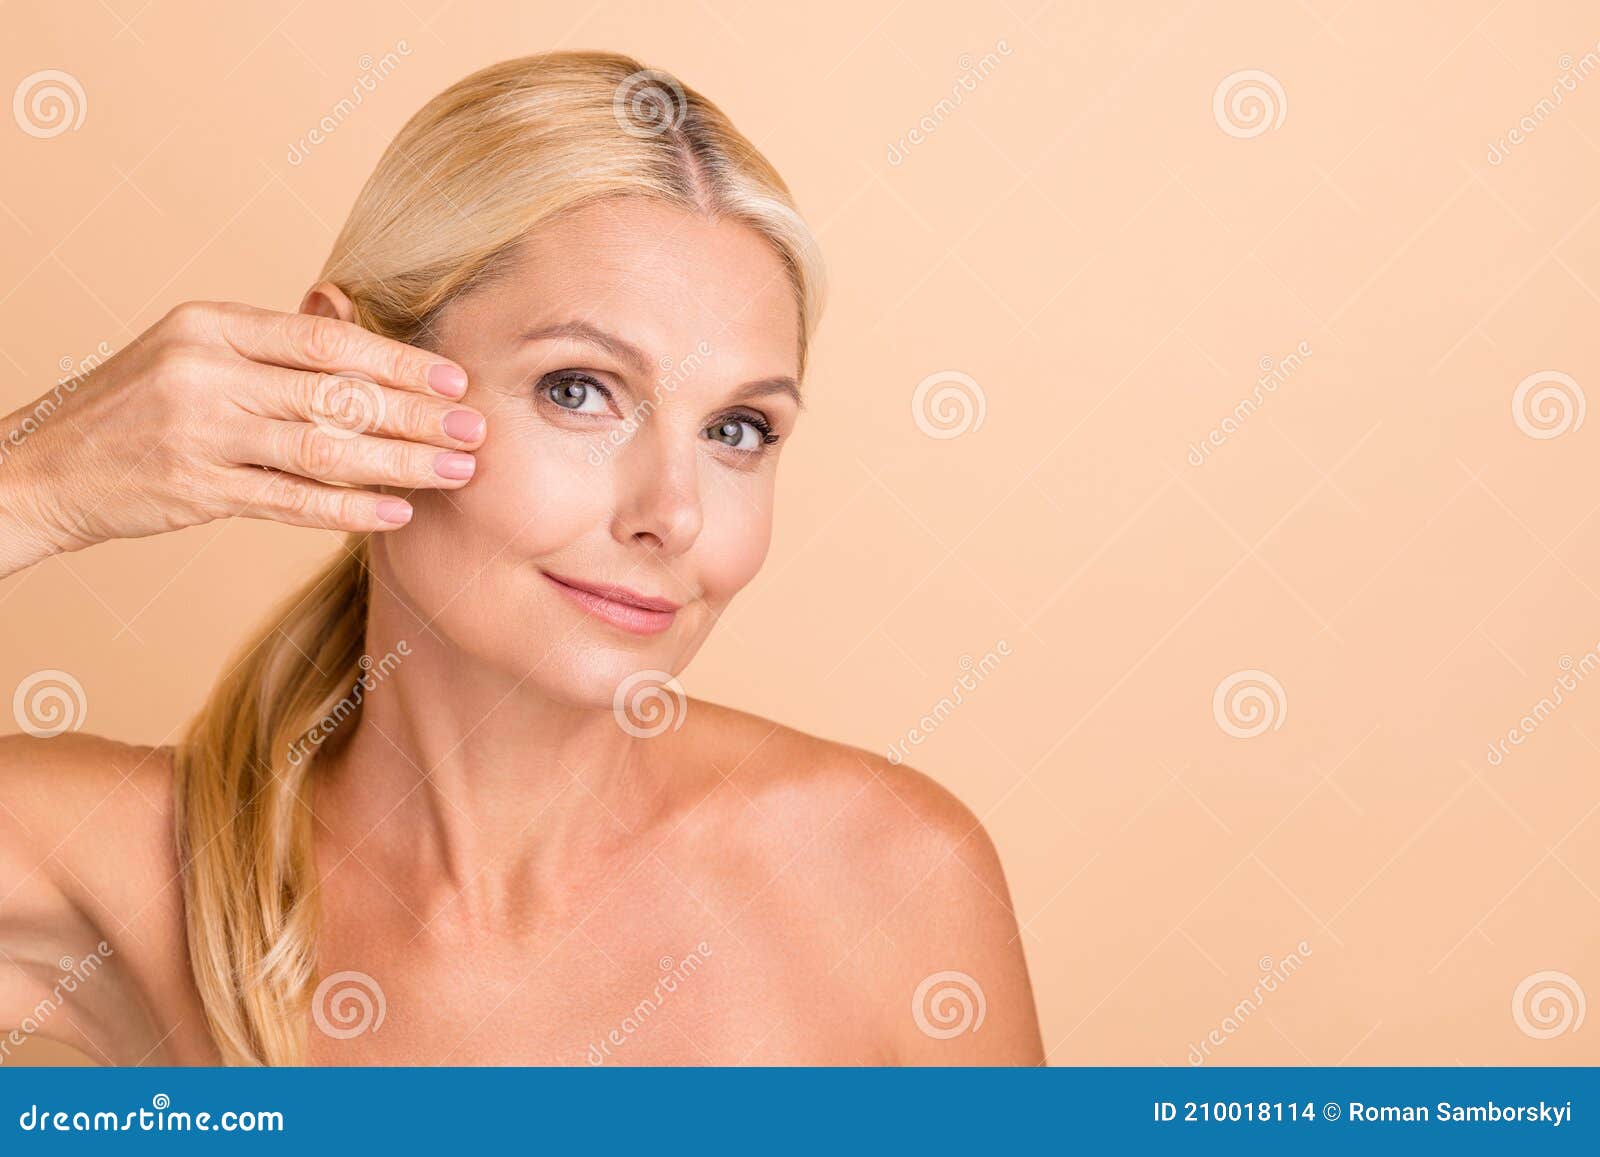 closeup photo of natural beauty aged lady nude shoulders touch fingers cheek apply anti age uplift cream  beige